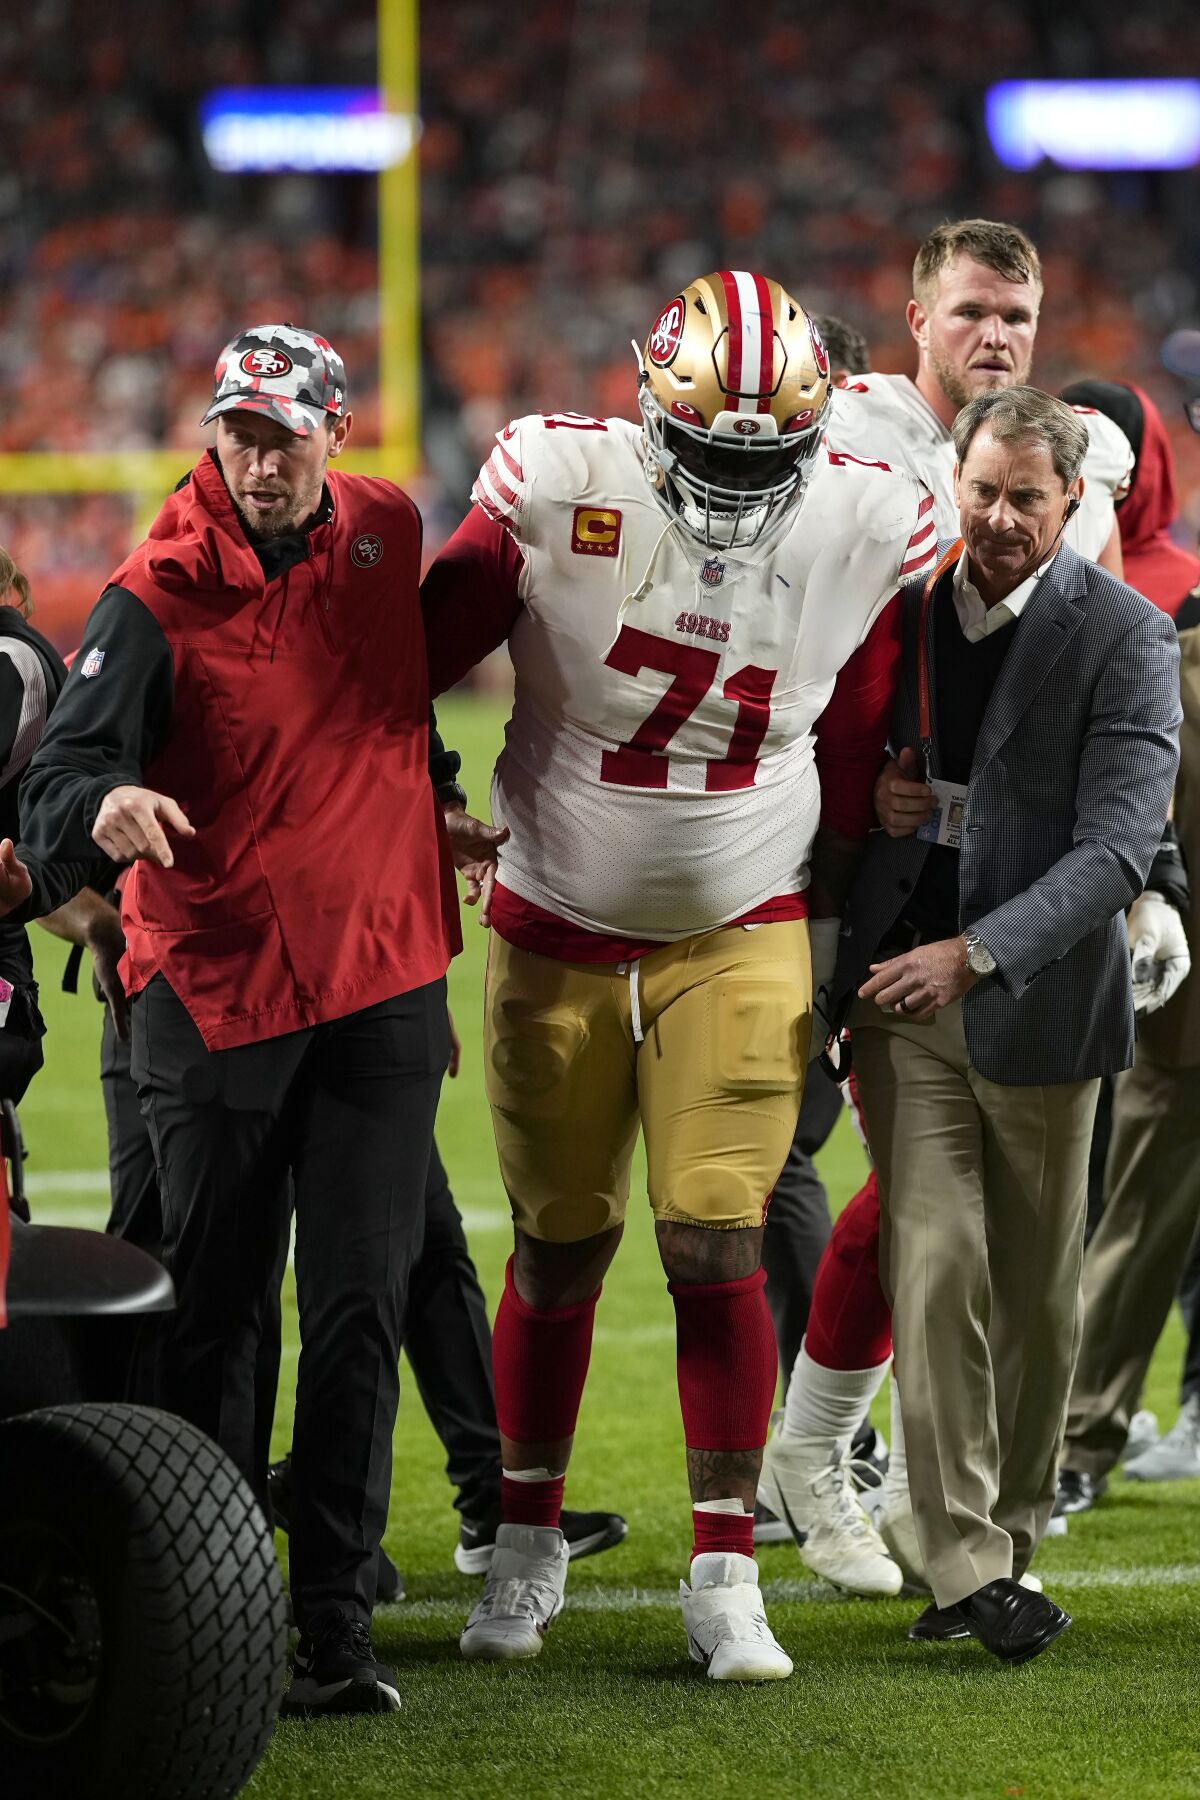 San Francisco 49ers offensive tackle Trent Williams (71) is helped off the field during the second half of an NFL football game against the Denver Broncos in Denver, Sunday, Sept. 25, 2022. (AP Photo/Jack Dempsey)